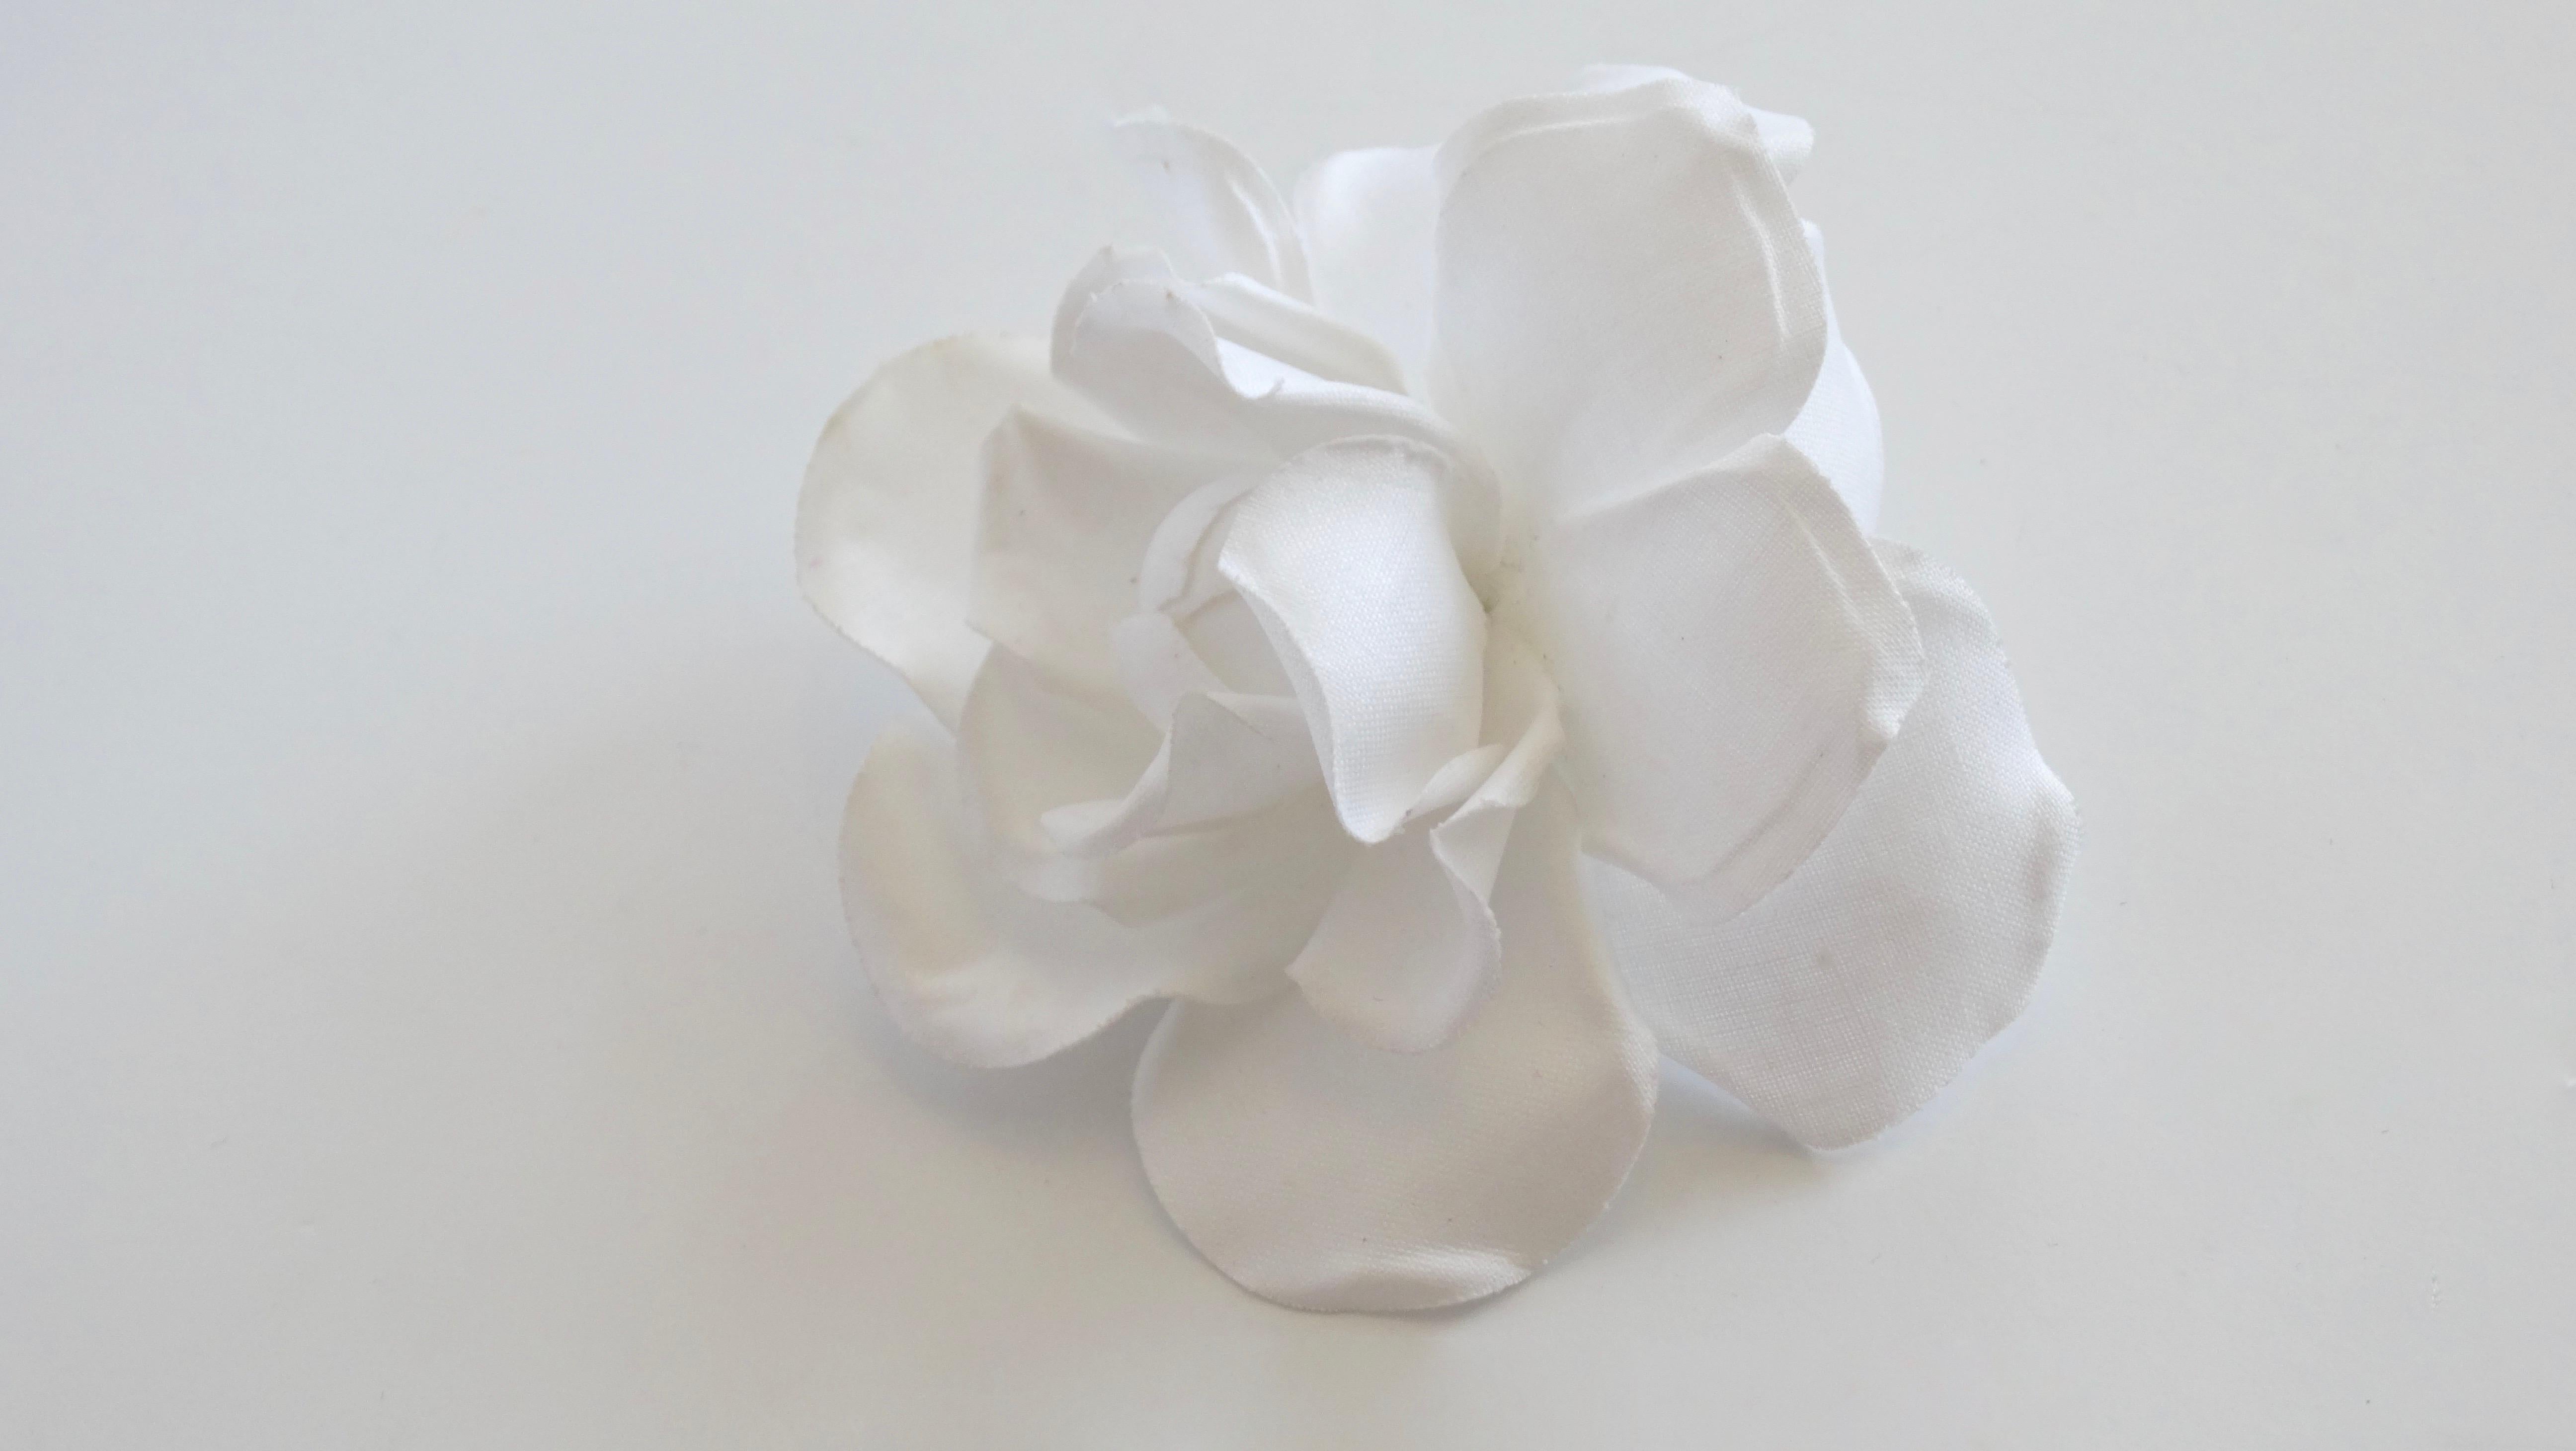 Be the ultimate Chanel girl with this brooch! Circa early 1980s, this brooch is made of white cotton fabric and crafted into the signature Chanel Camellia flower. Classic and timeless, this brooch is the perfect addition to your favorite Chanel